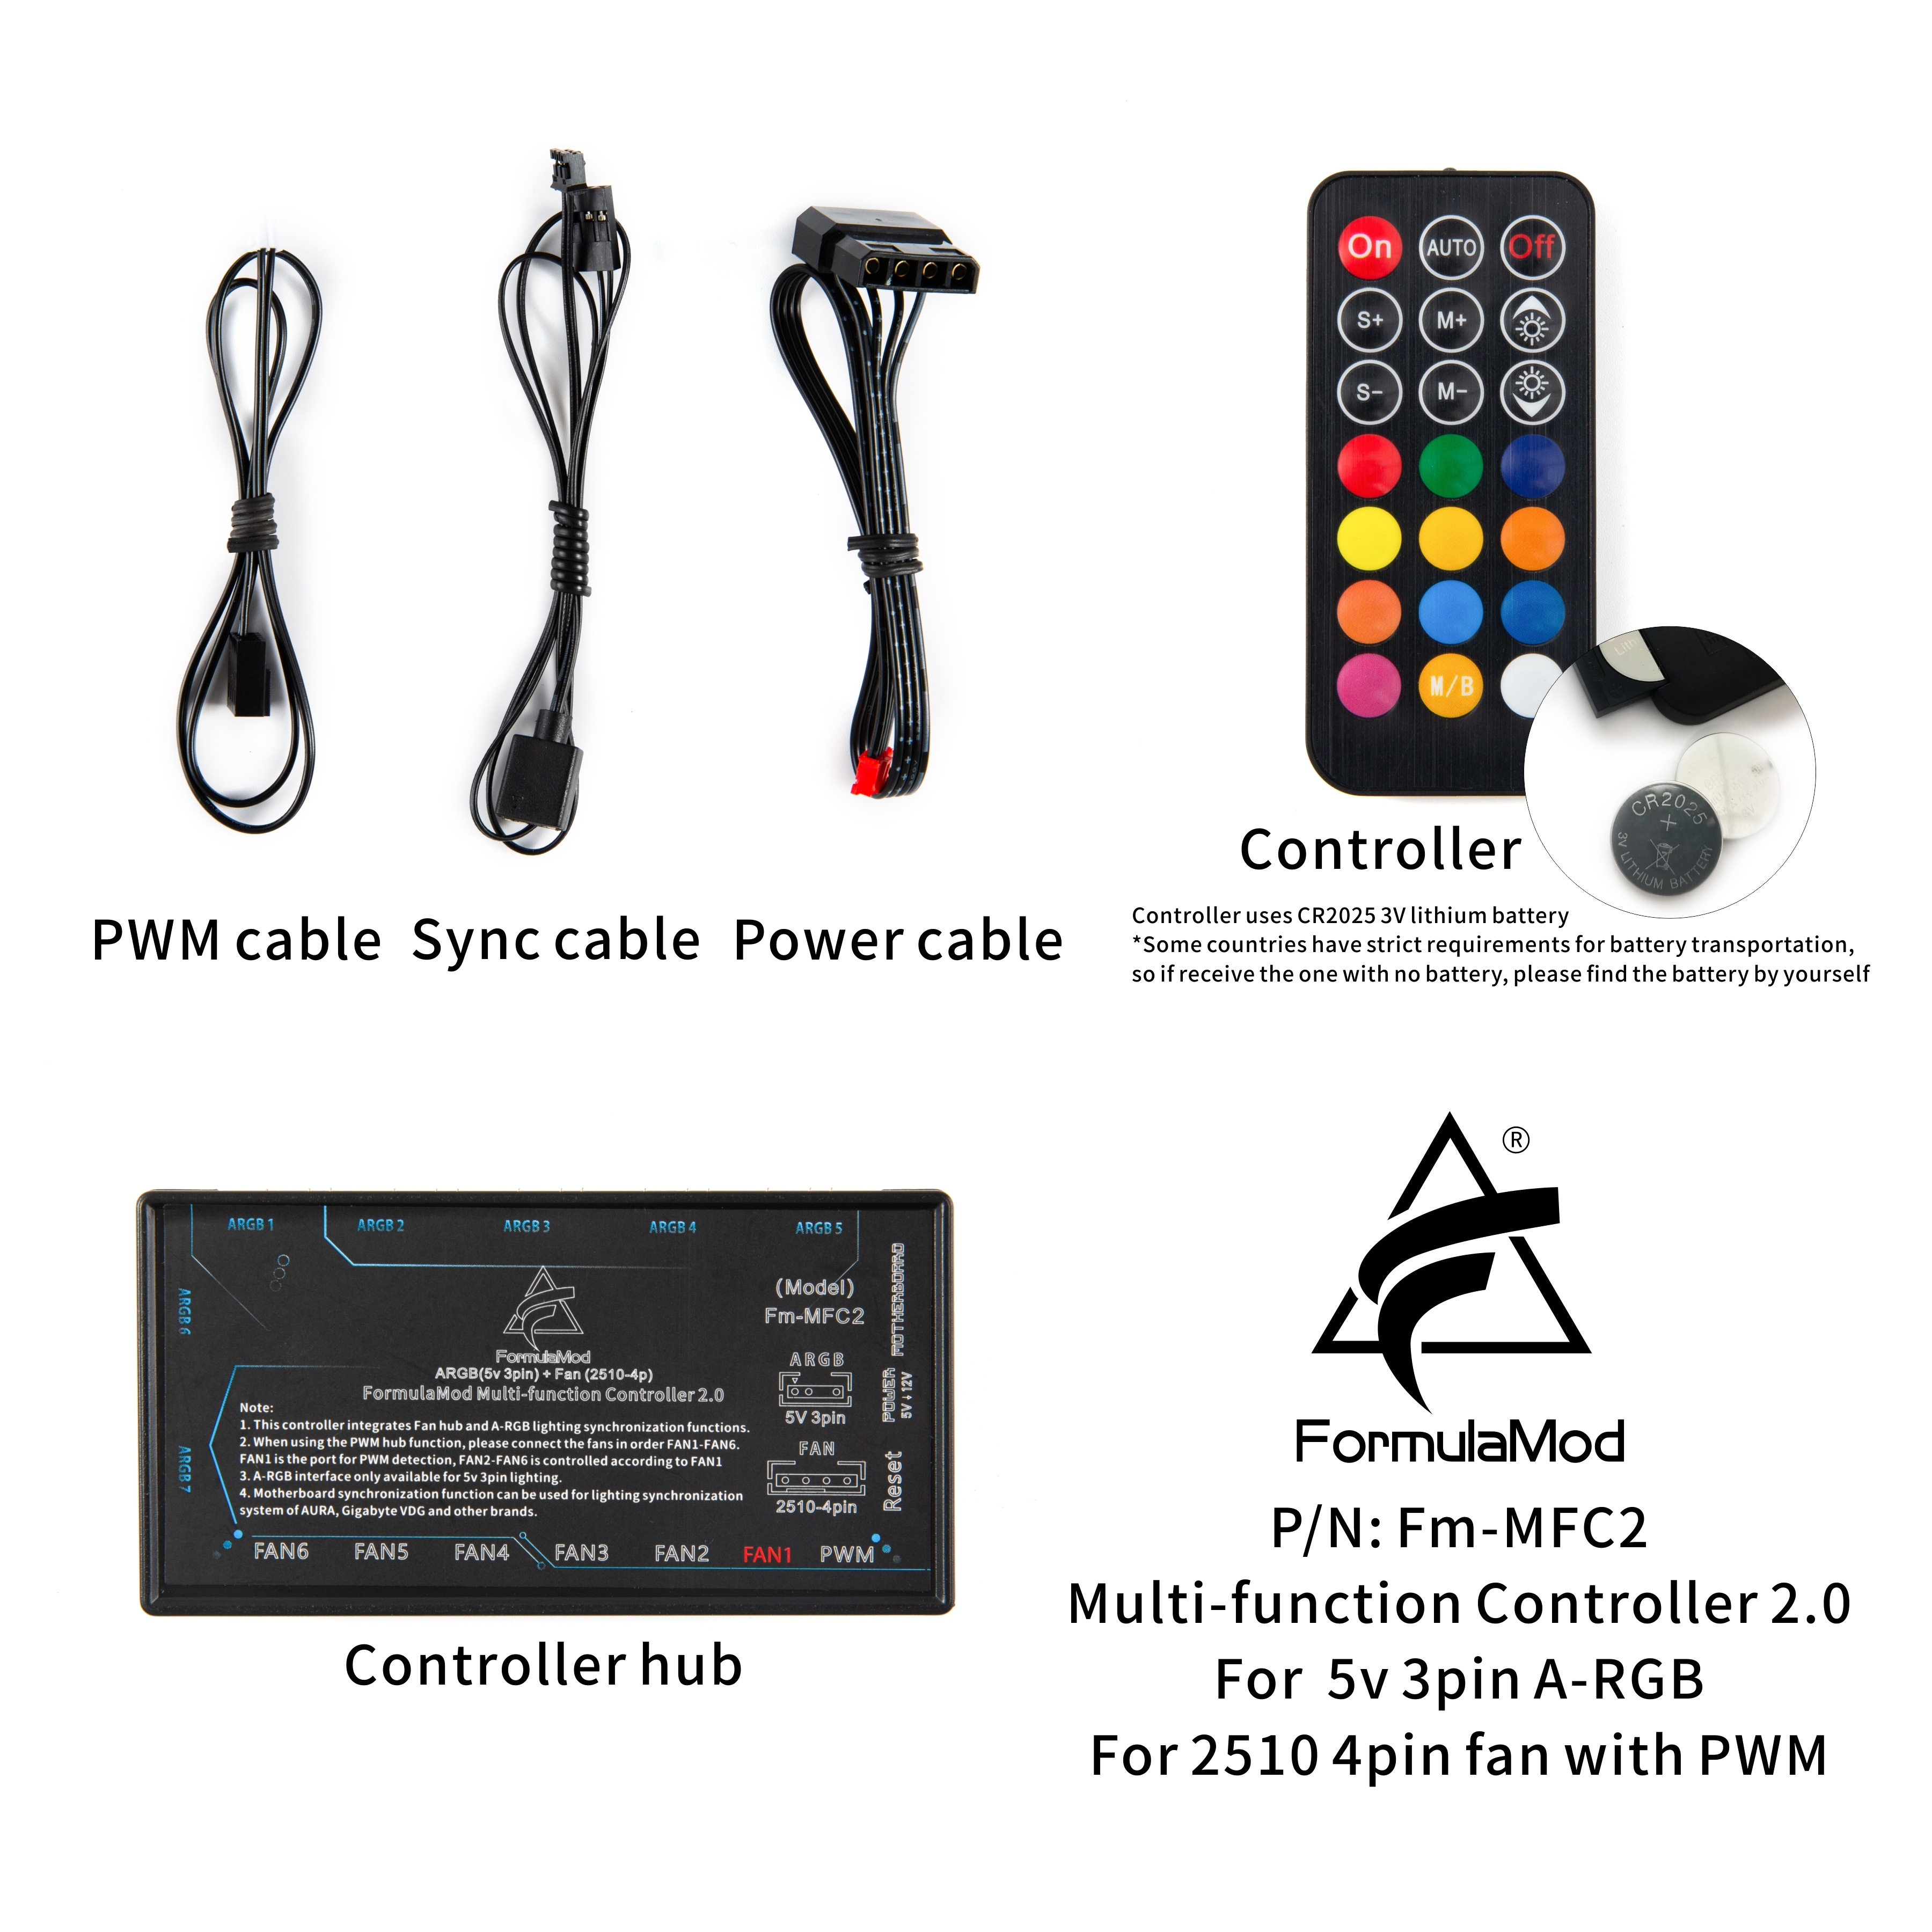 FormulaMod Fm-MFC2 Sync Controller For ARGB(5v 3pin) Lighting & Fan(2510-4pin) Power/PWM, Hub For Connecting/Sync To Motherboard  